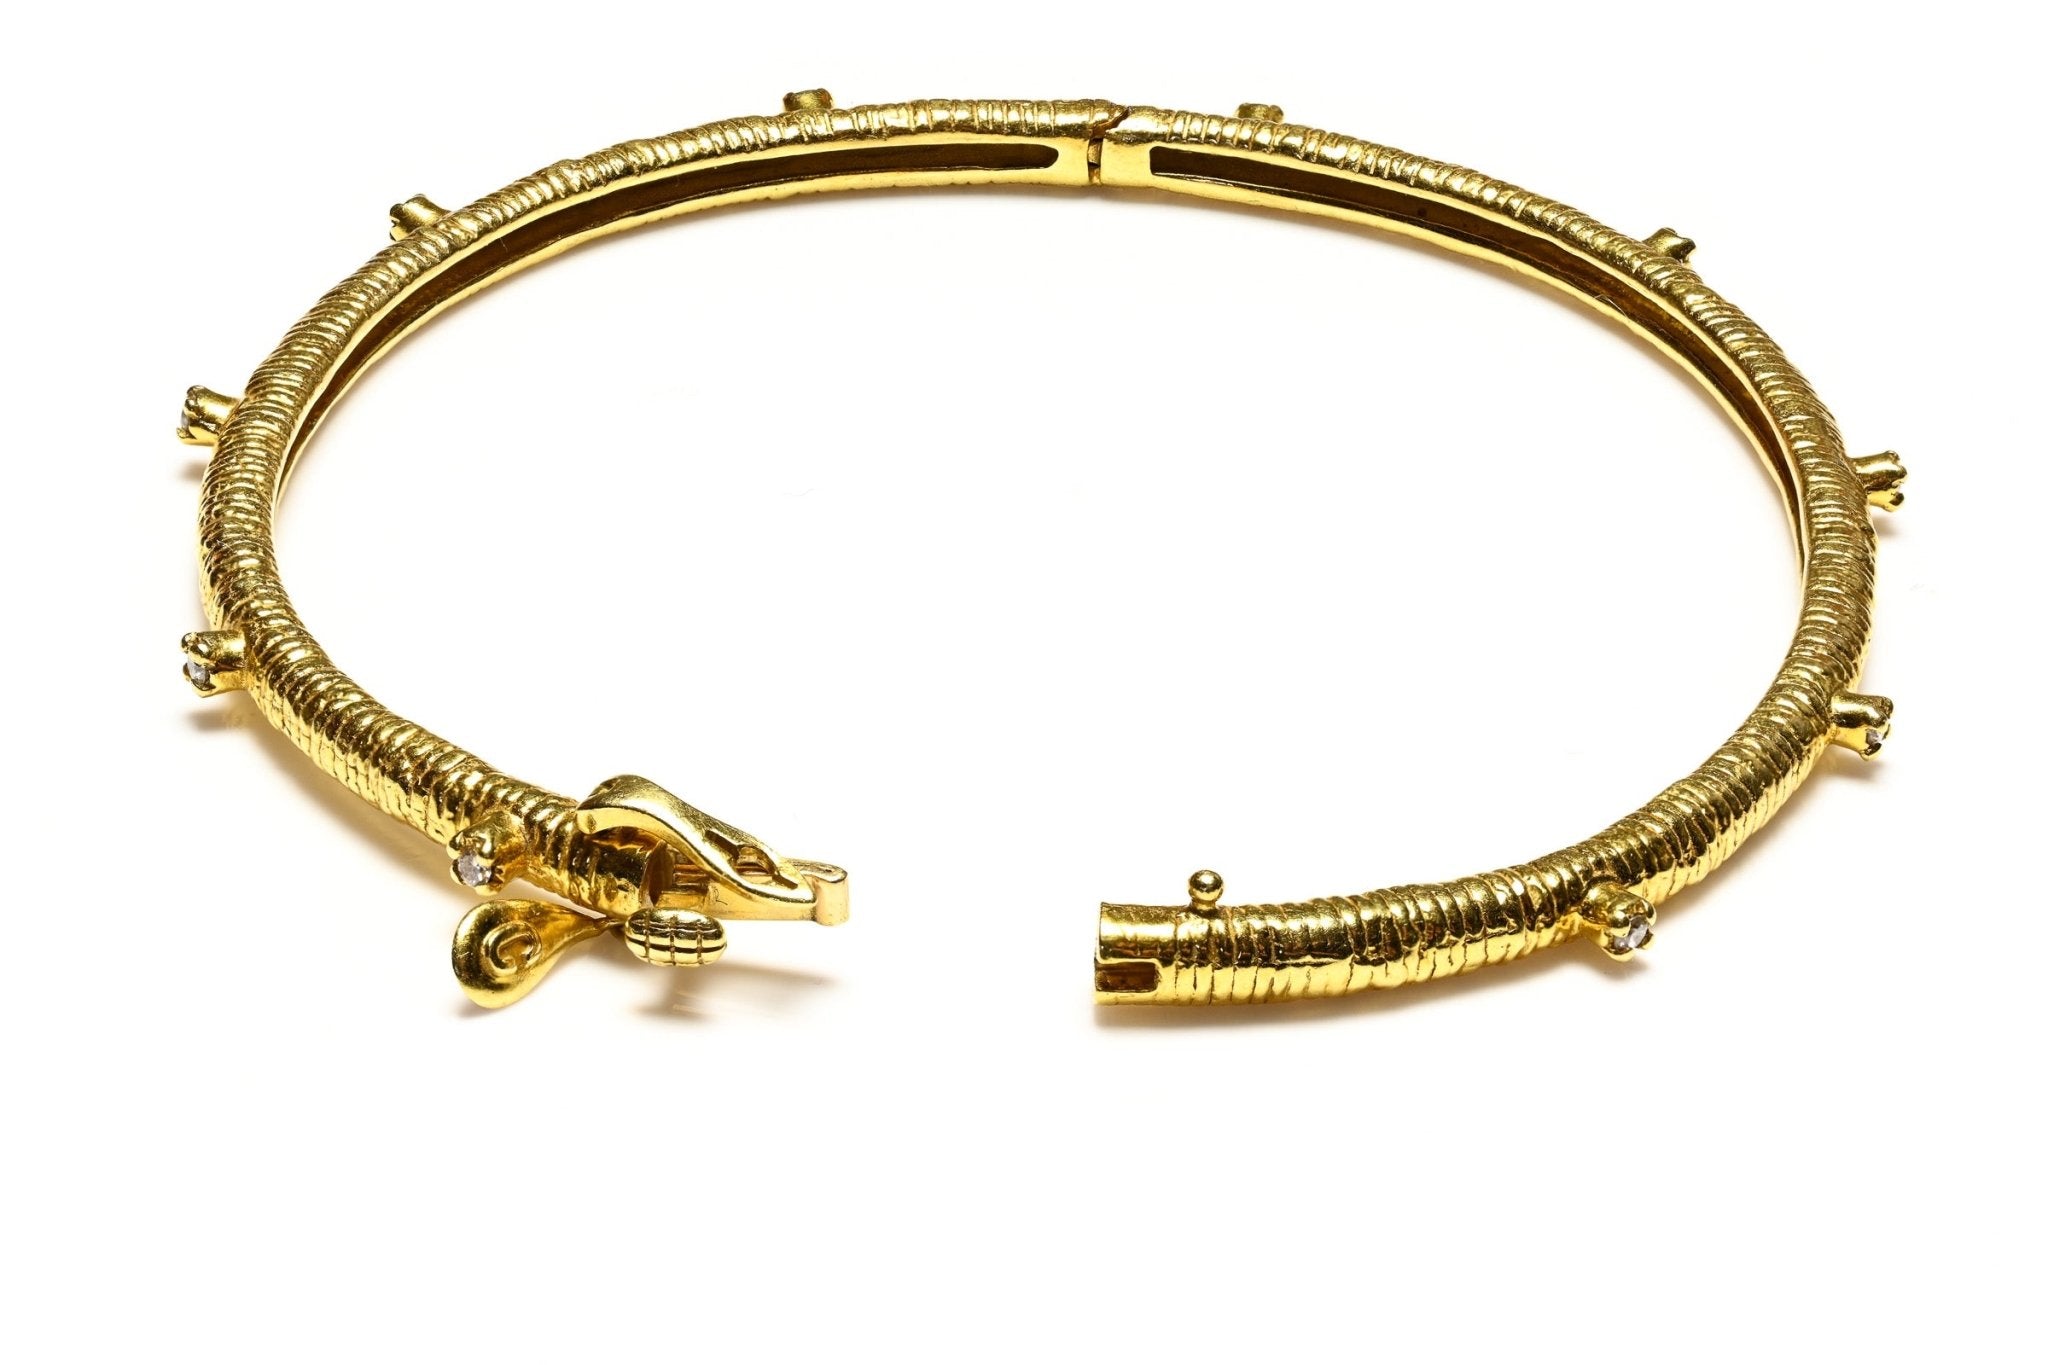 Coomi 20K Gold Diamond Wrapped Bangle Bracelet - DSF Antique Jewelry